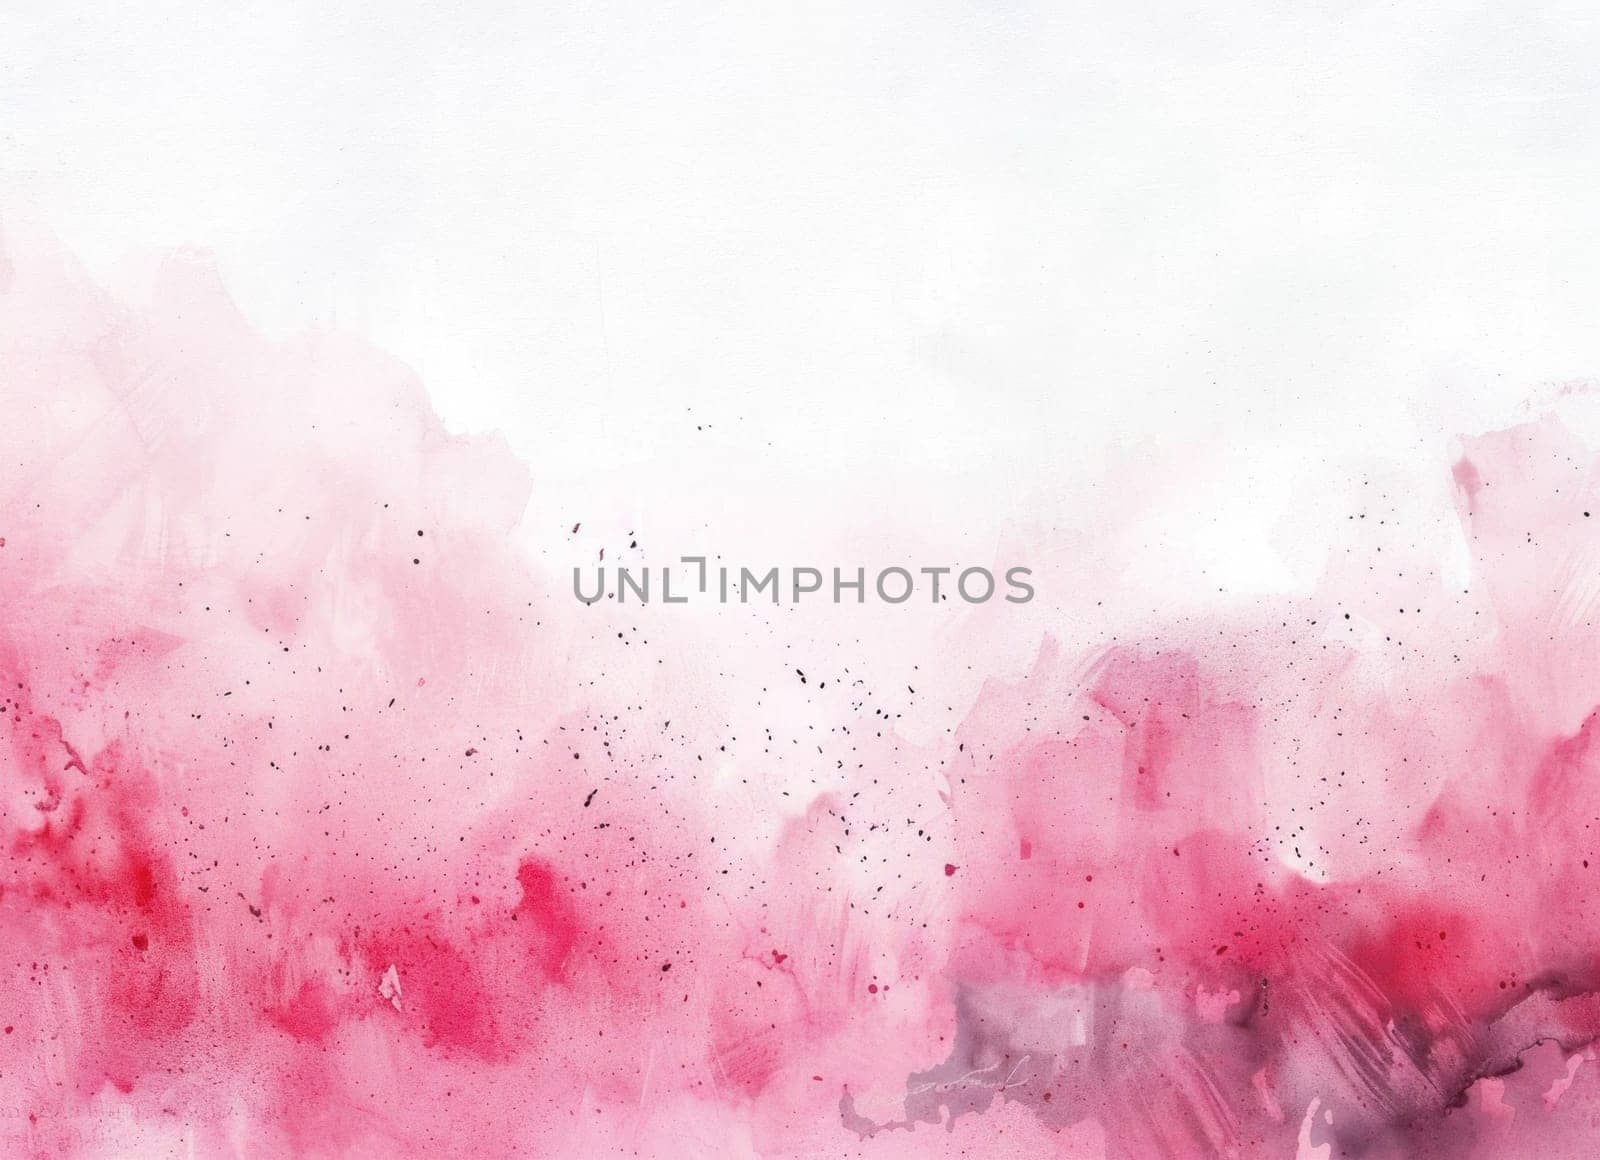 Abstract watercolor background with pink and purple splashes on a white background beauty in colorful motion and harmony